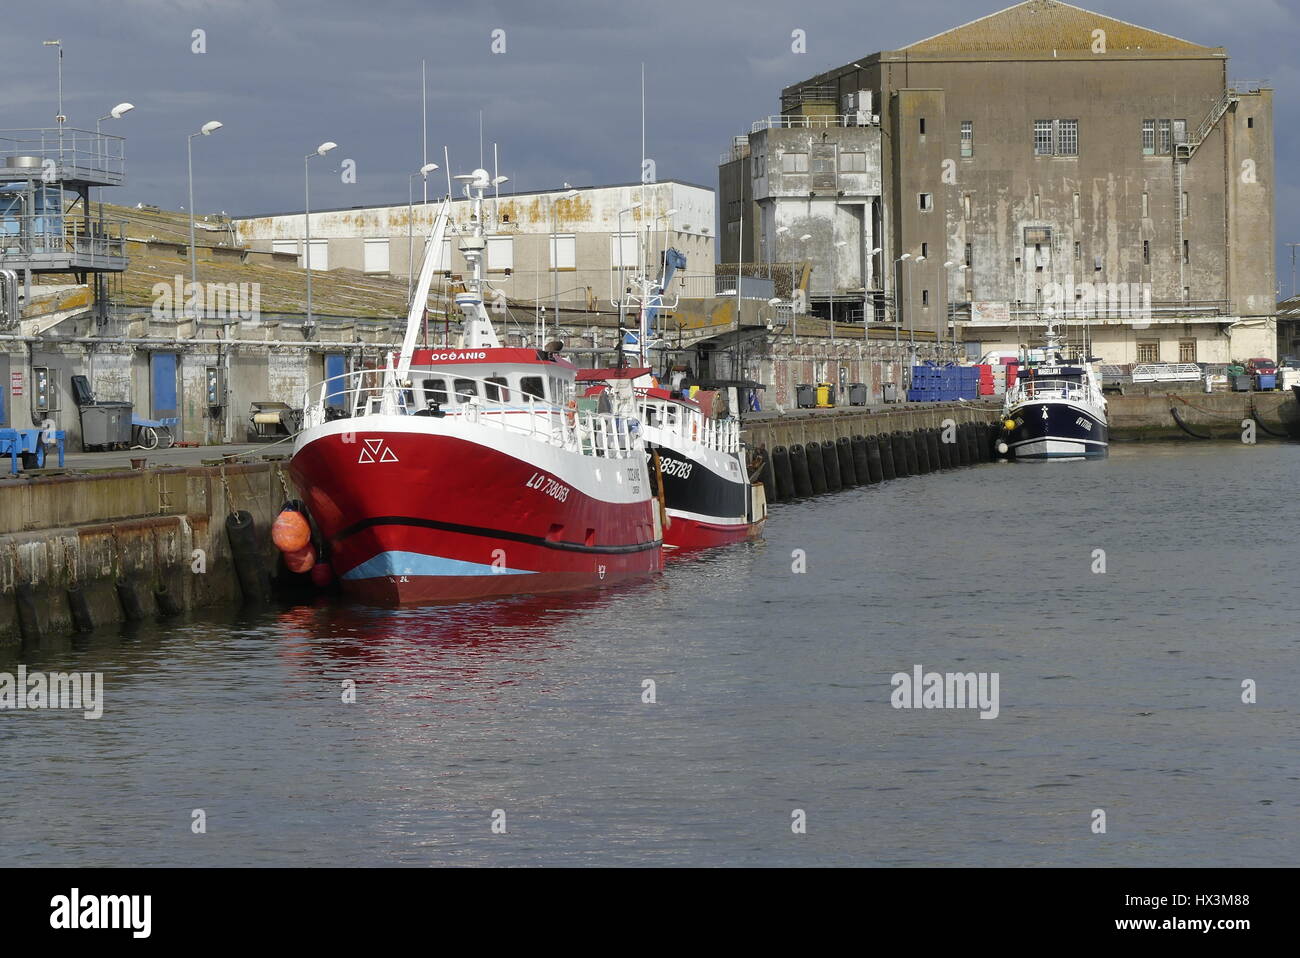 Lorient, France - March 24, 2017: Fishing boats docked at Keroman wharf, Lorient, Brittany, France Stock Photo